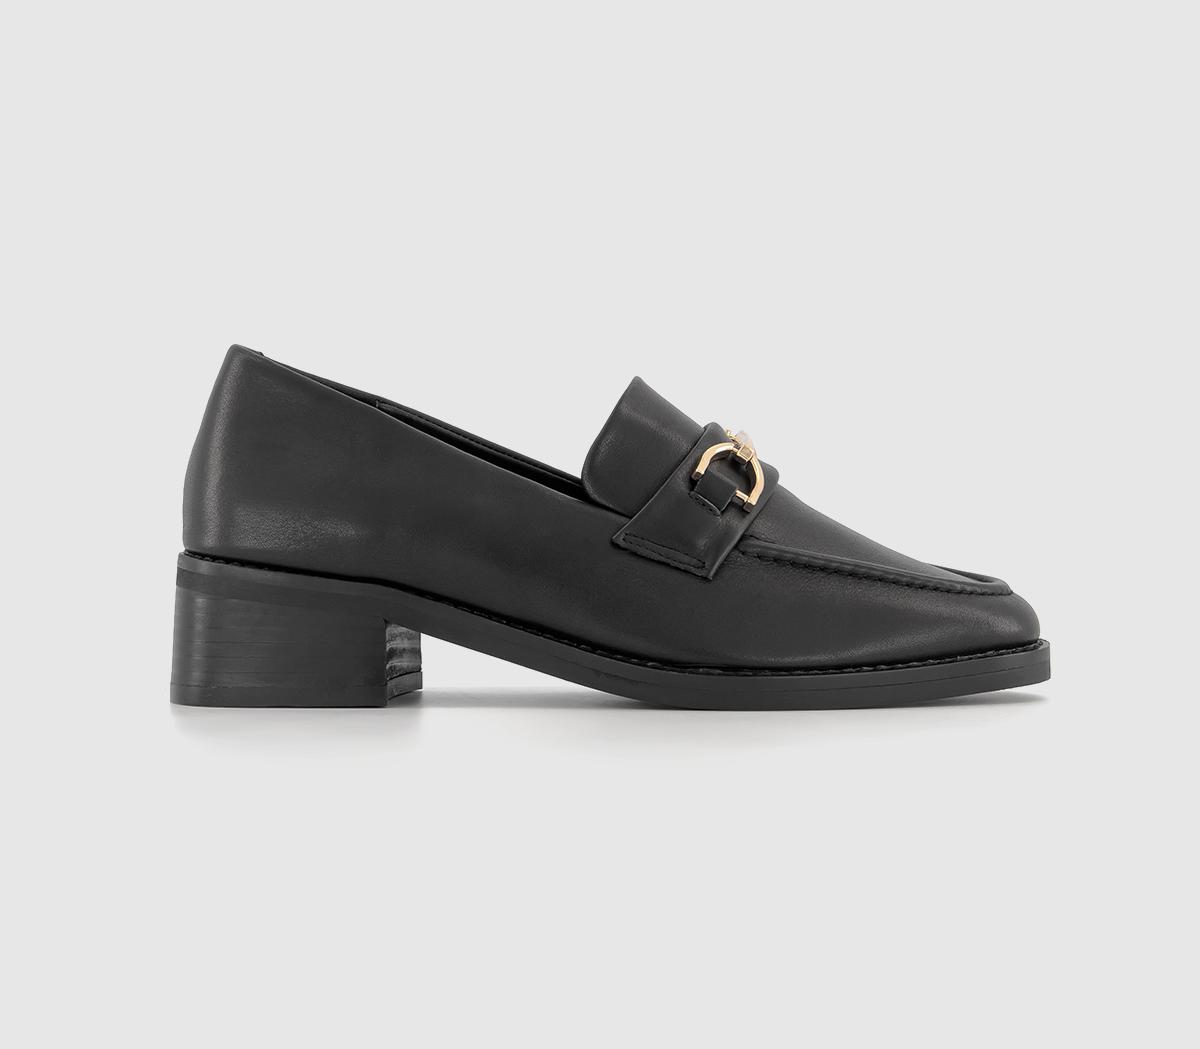 OFFICEFlair Patent Leather Heel LoafersBlack Leather